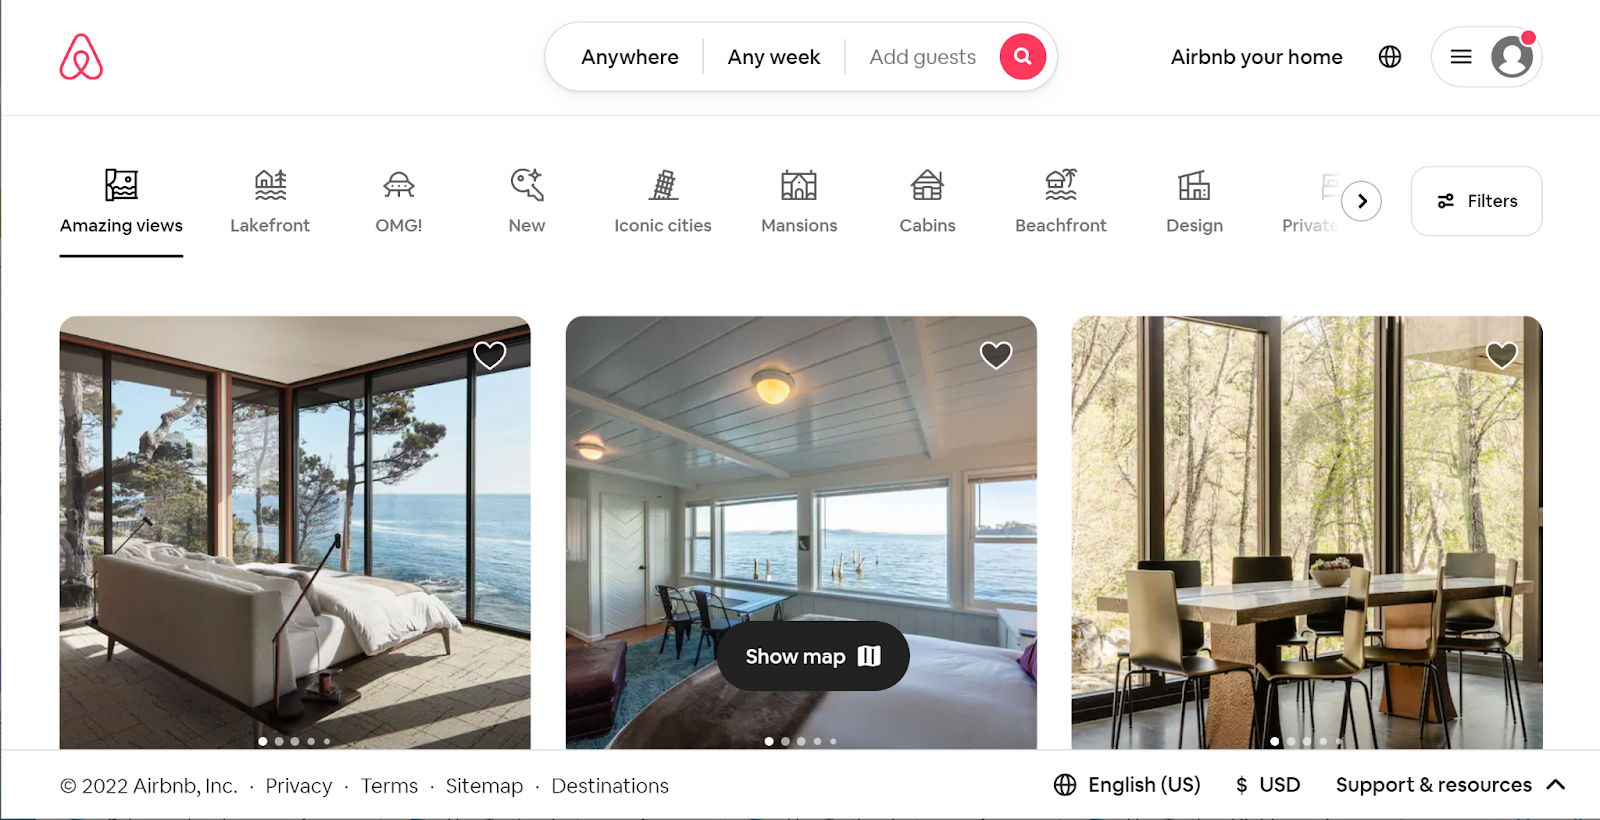 In 2022's home page, there's a banner at the top with icons for various experiences. The Amazing Views option is selected, and there are several listings pictured with beautiful views through the windows.